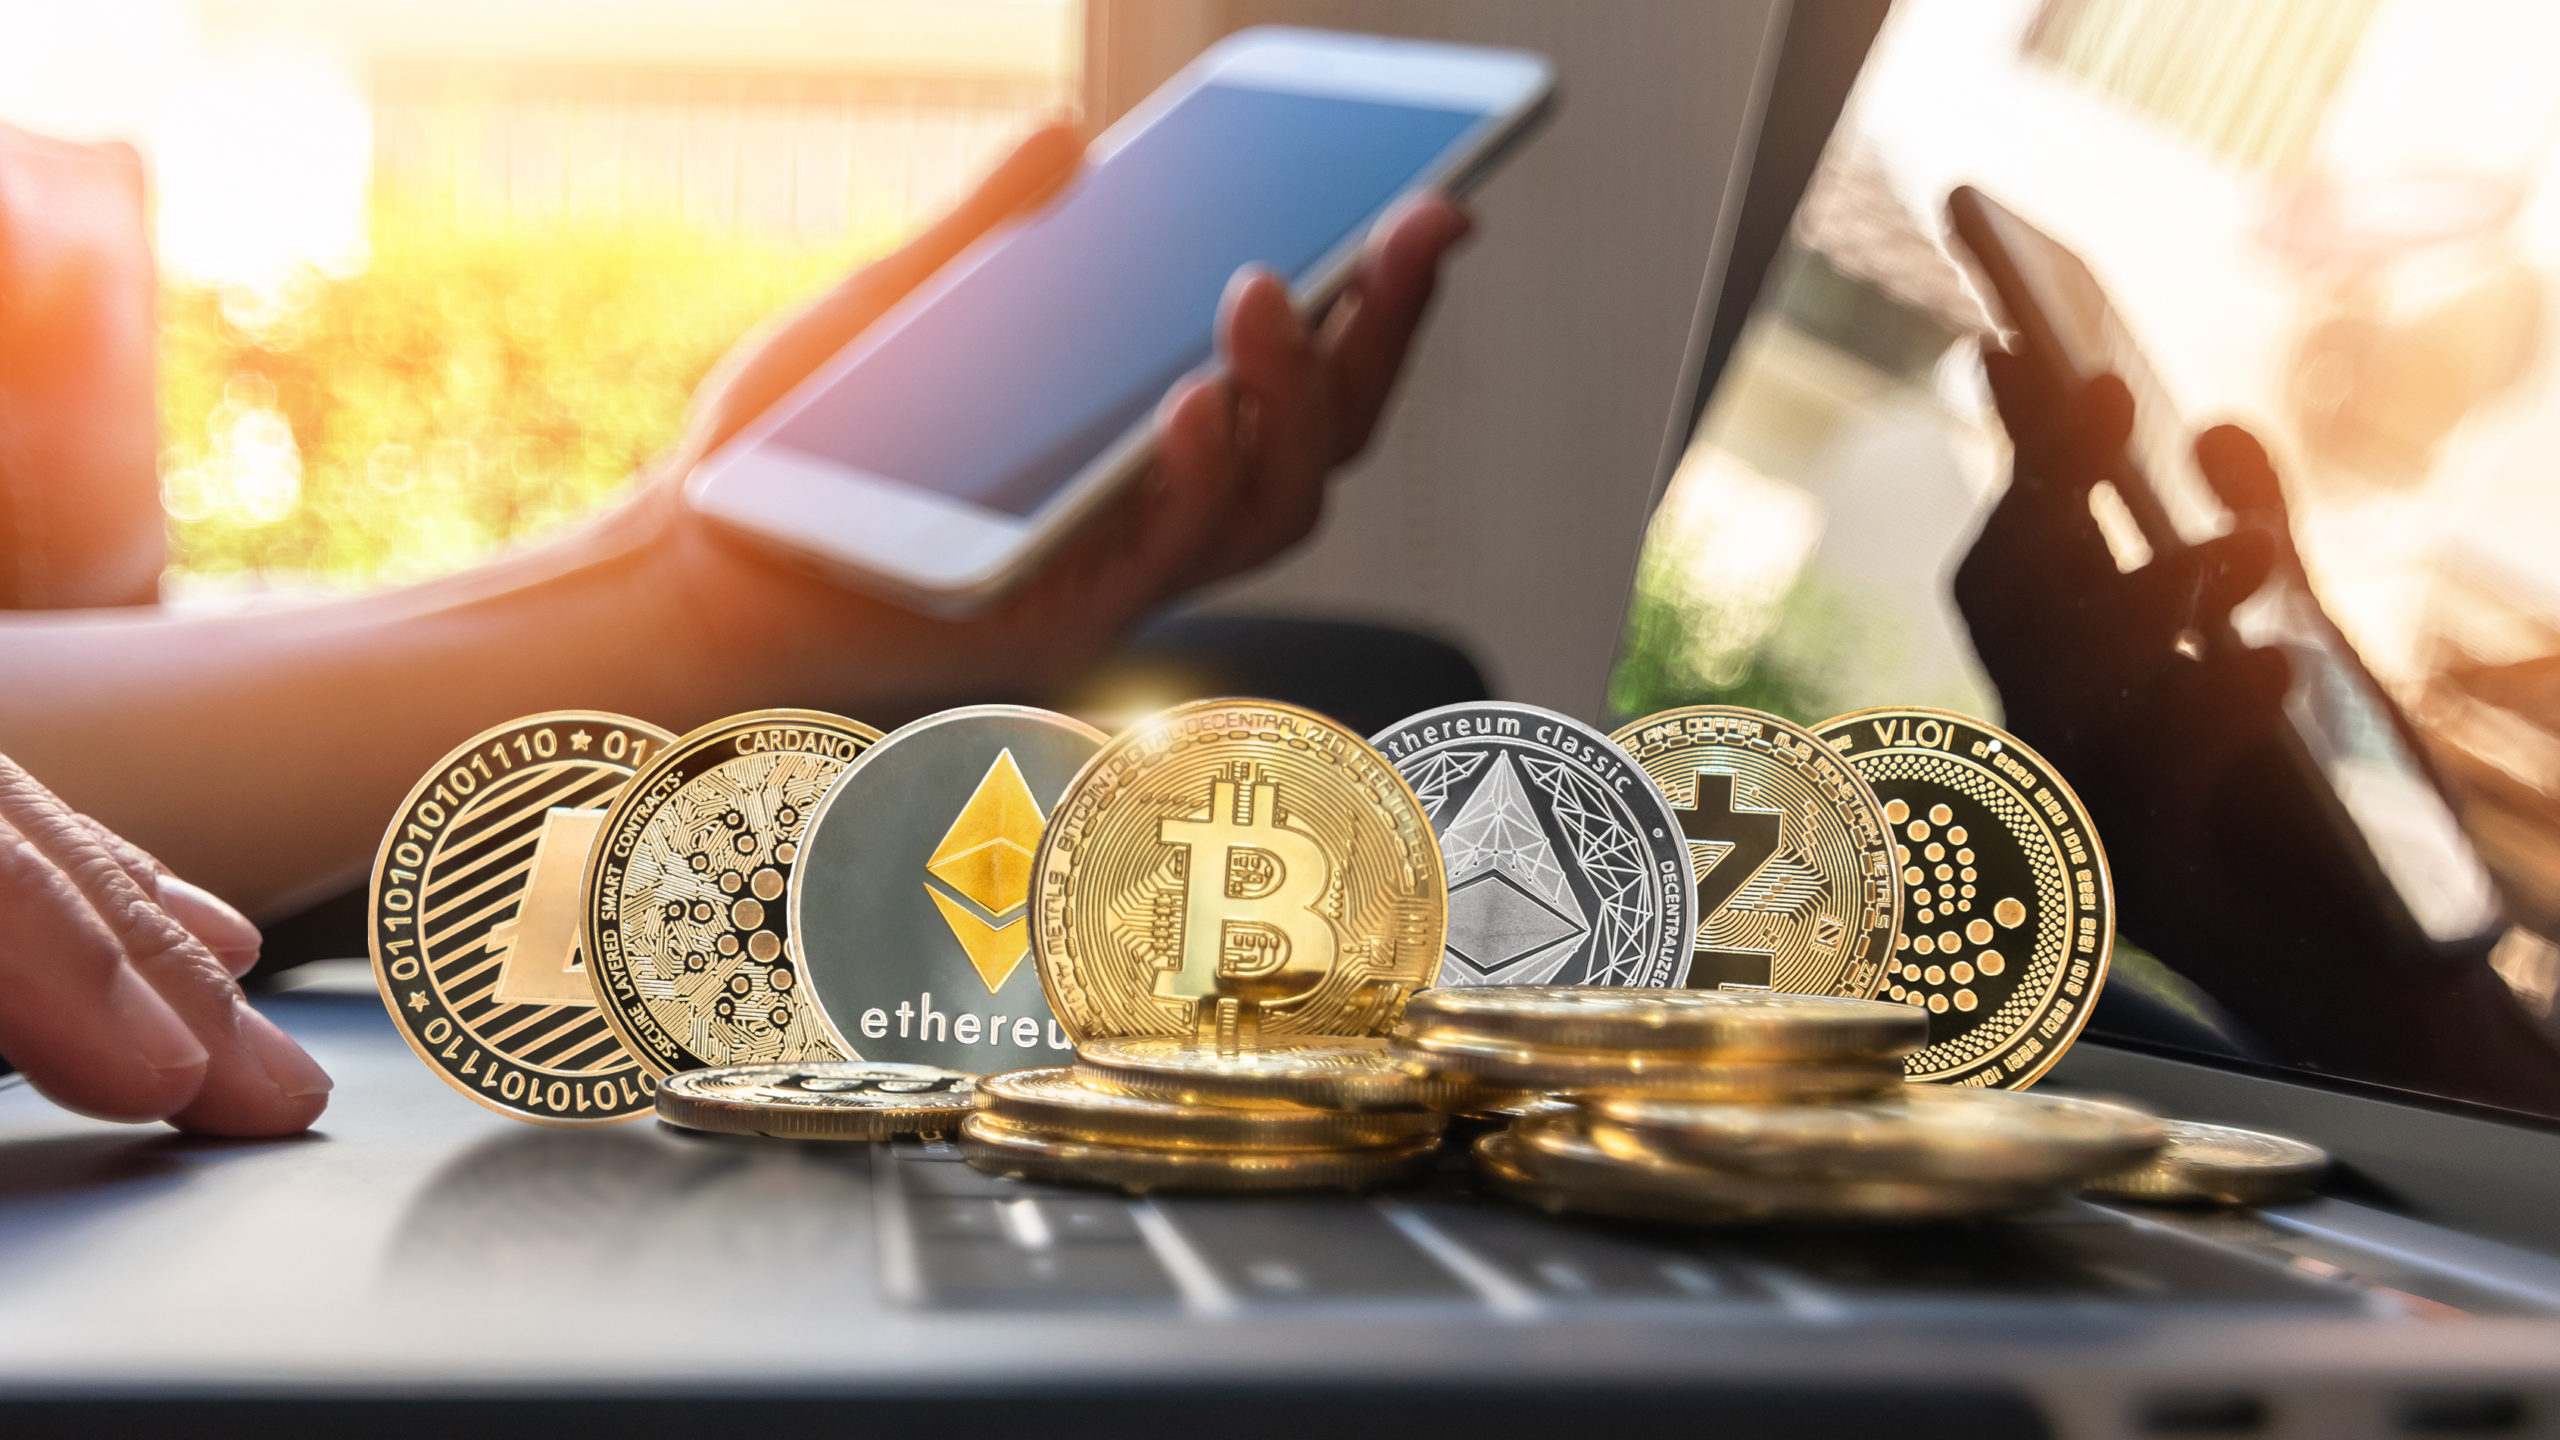 These local governments are blazing the trail for cryptocurrency adoption